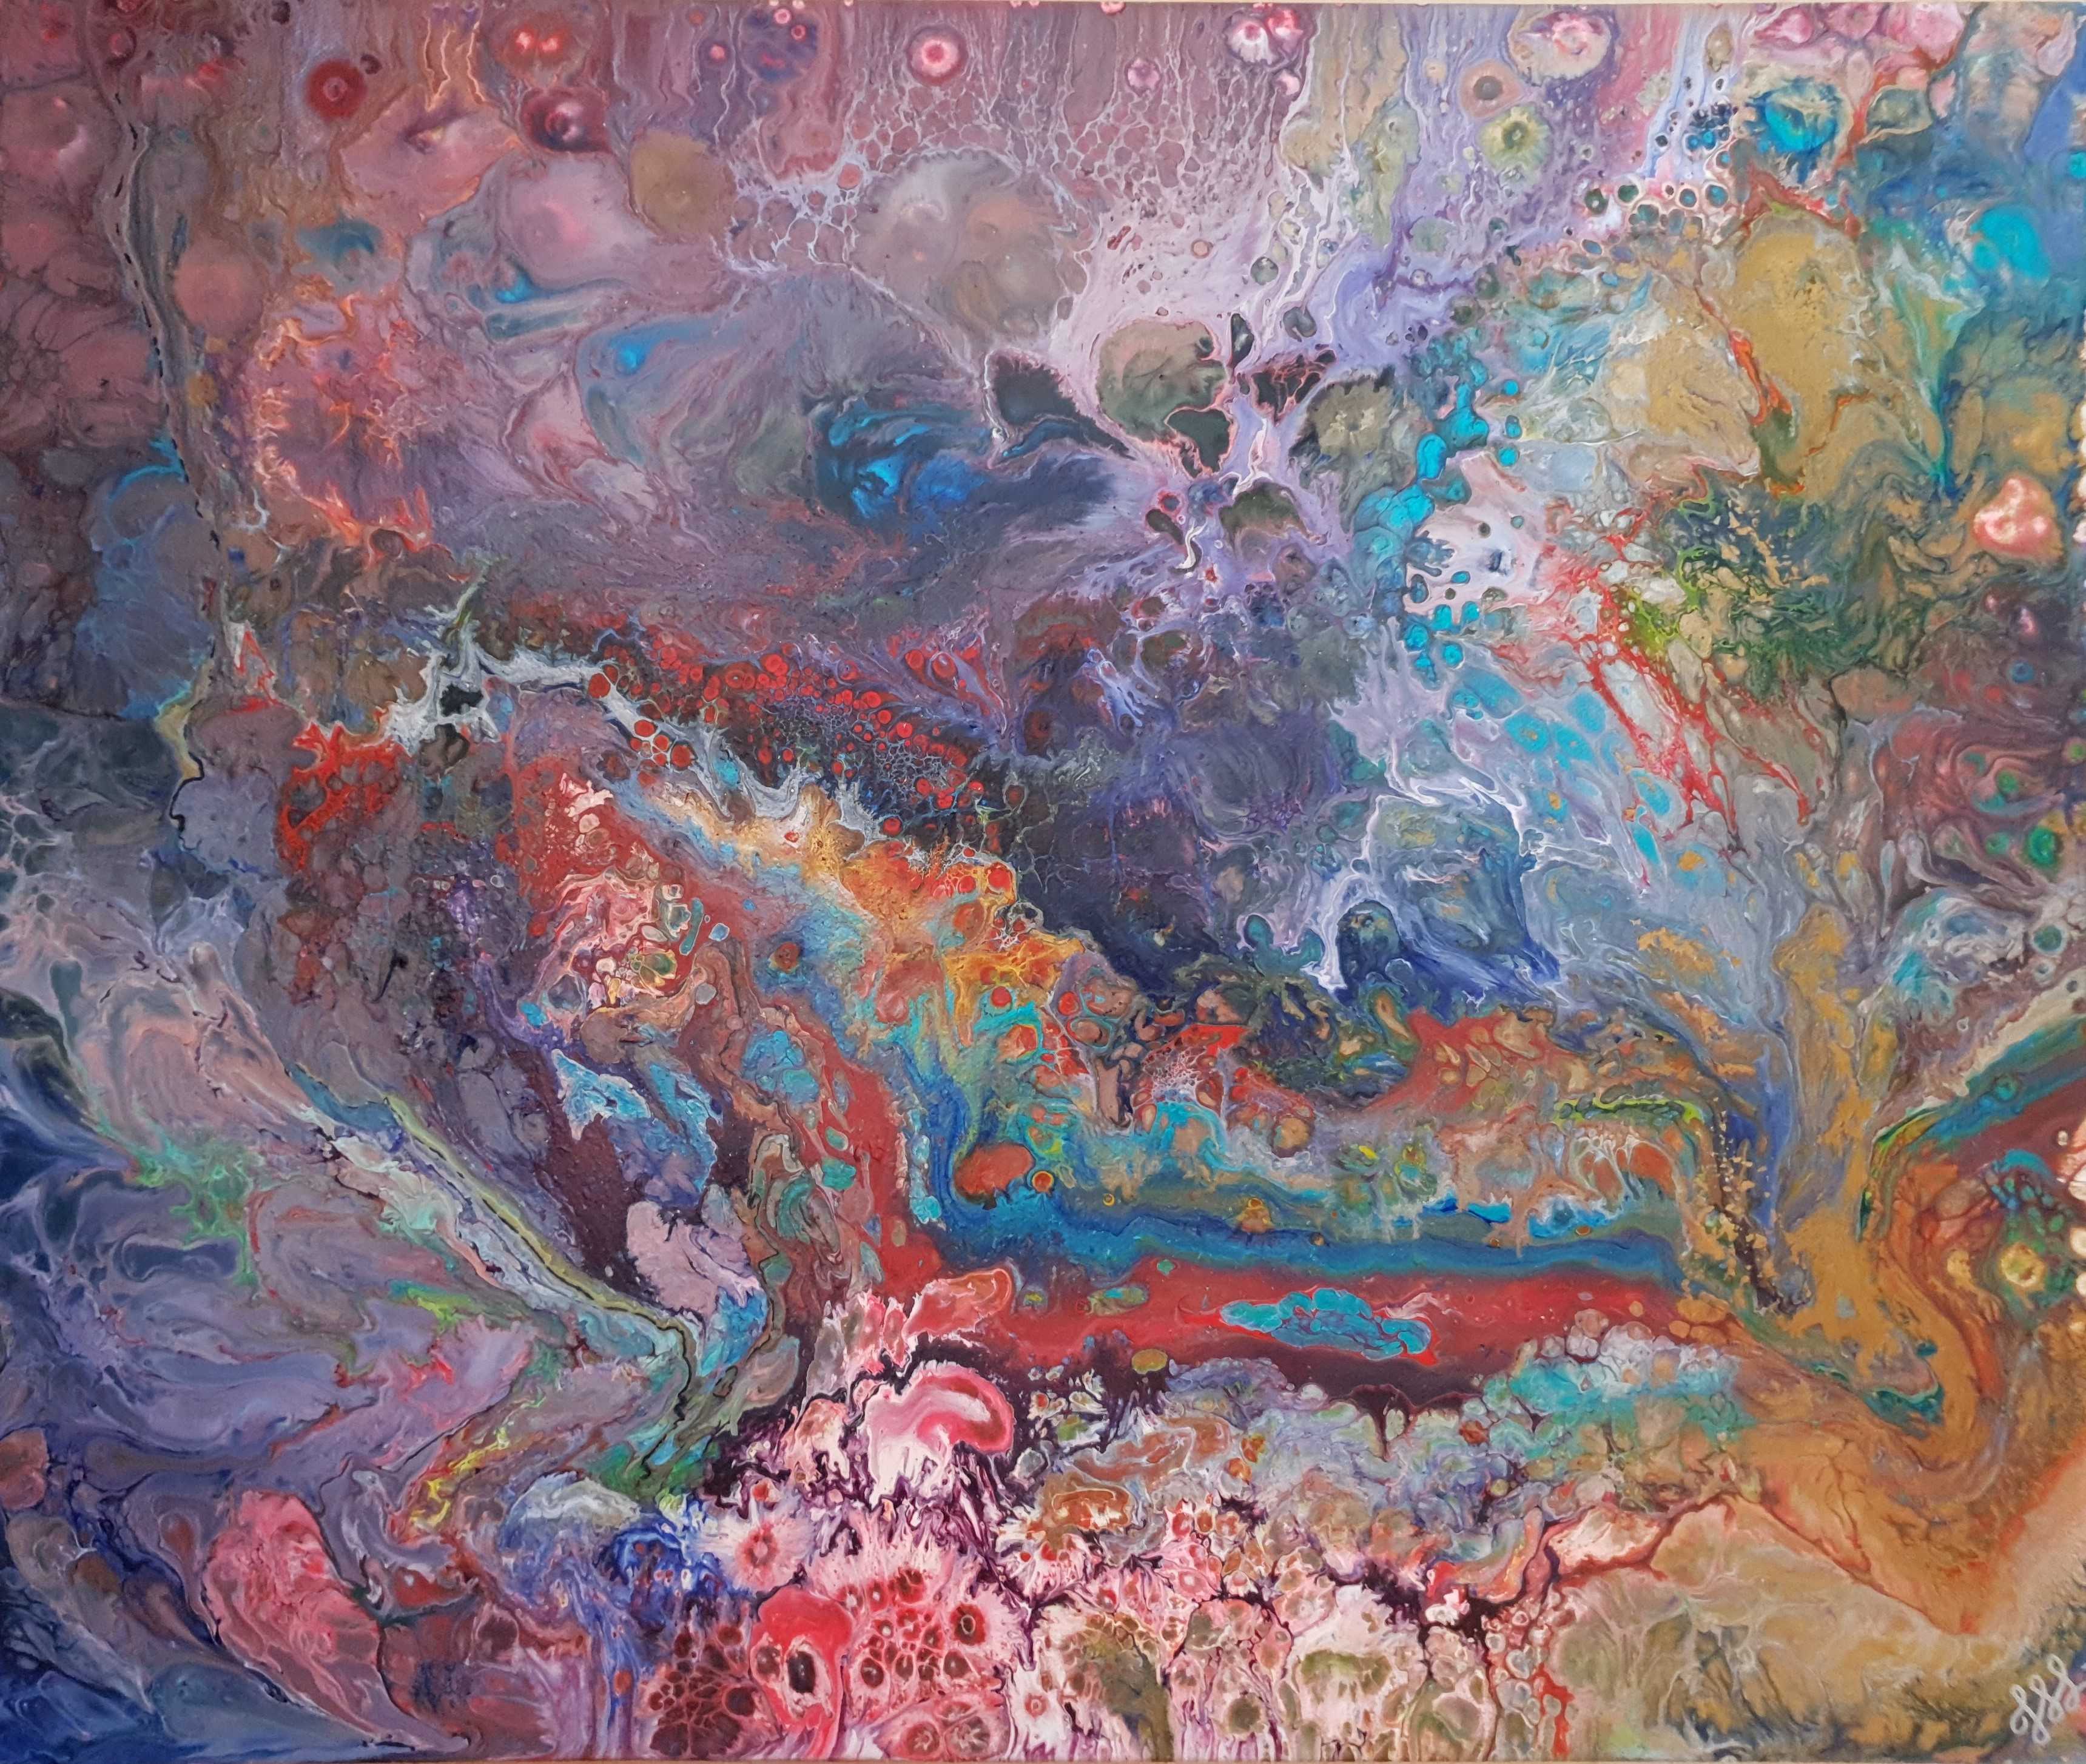 Abstract artwork depicting a coral reef